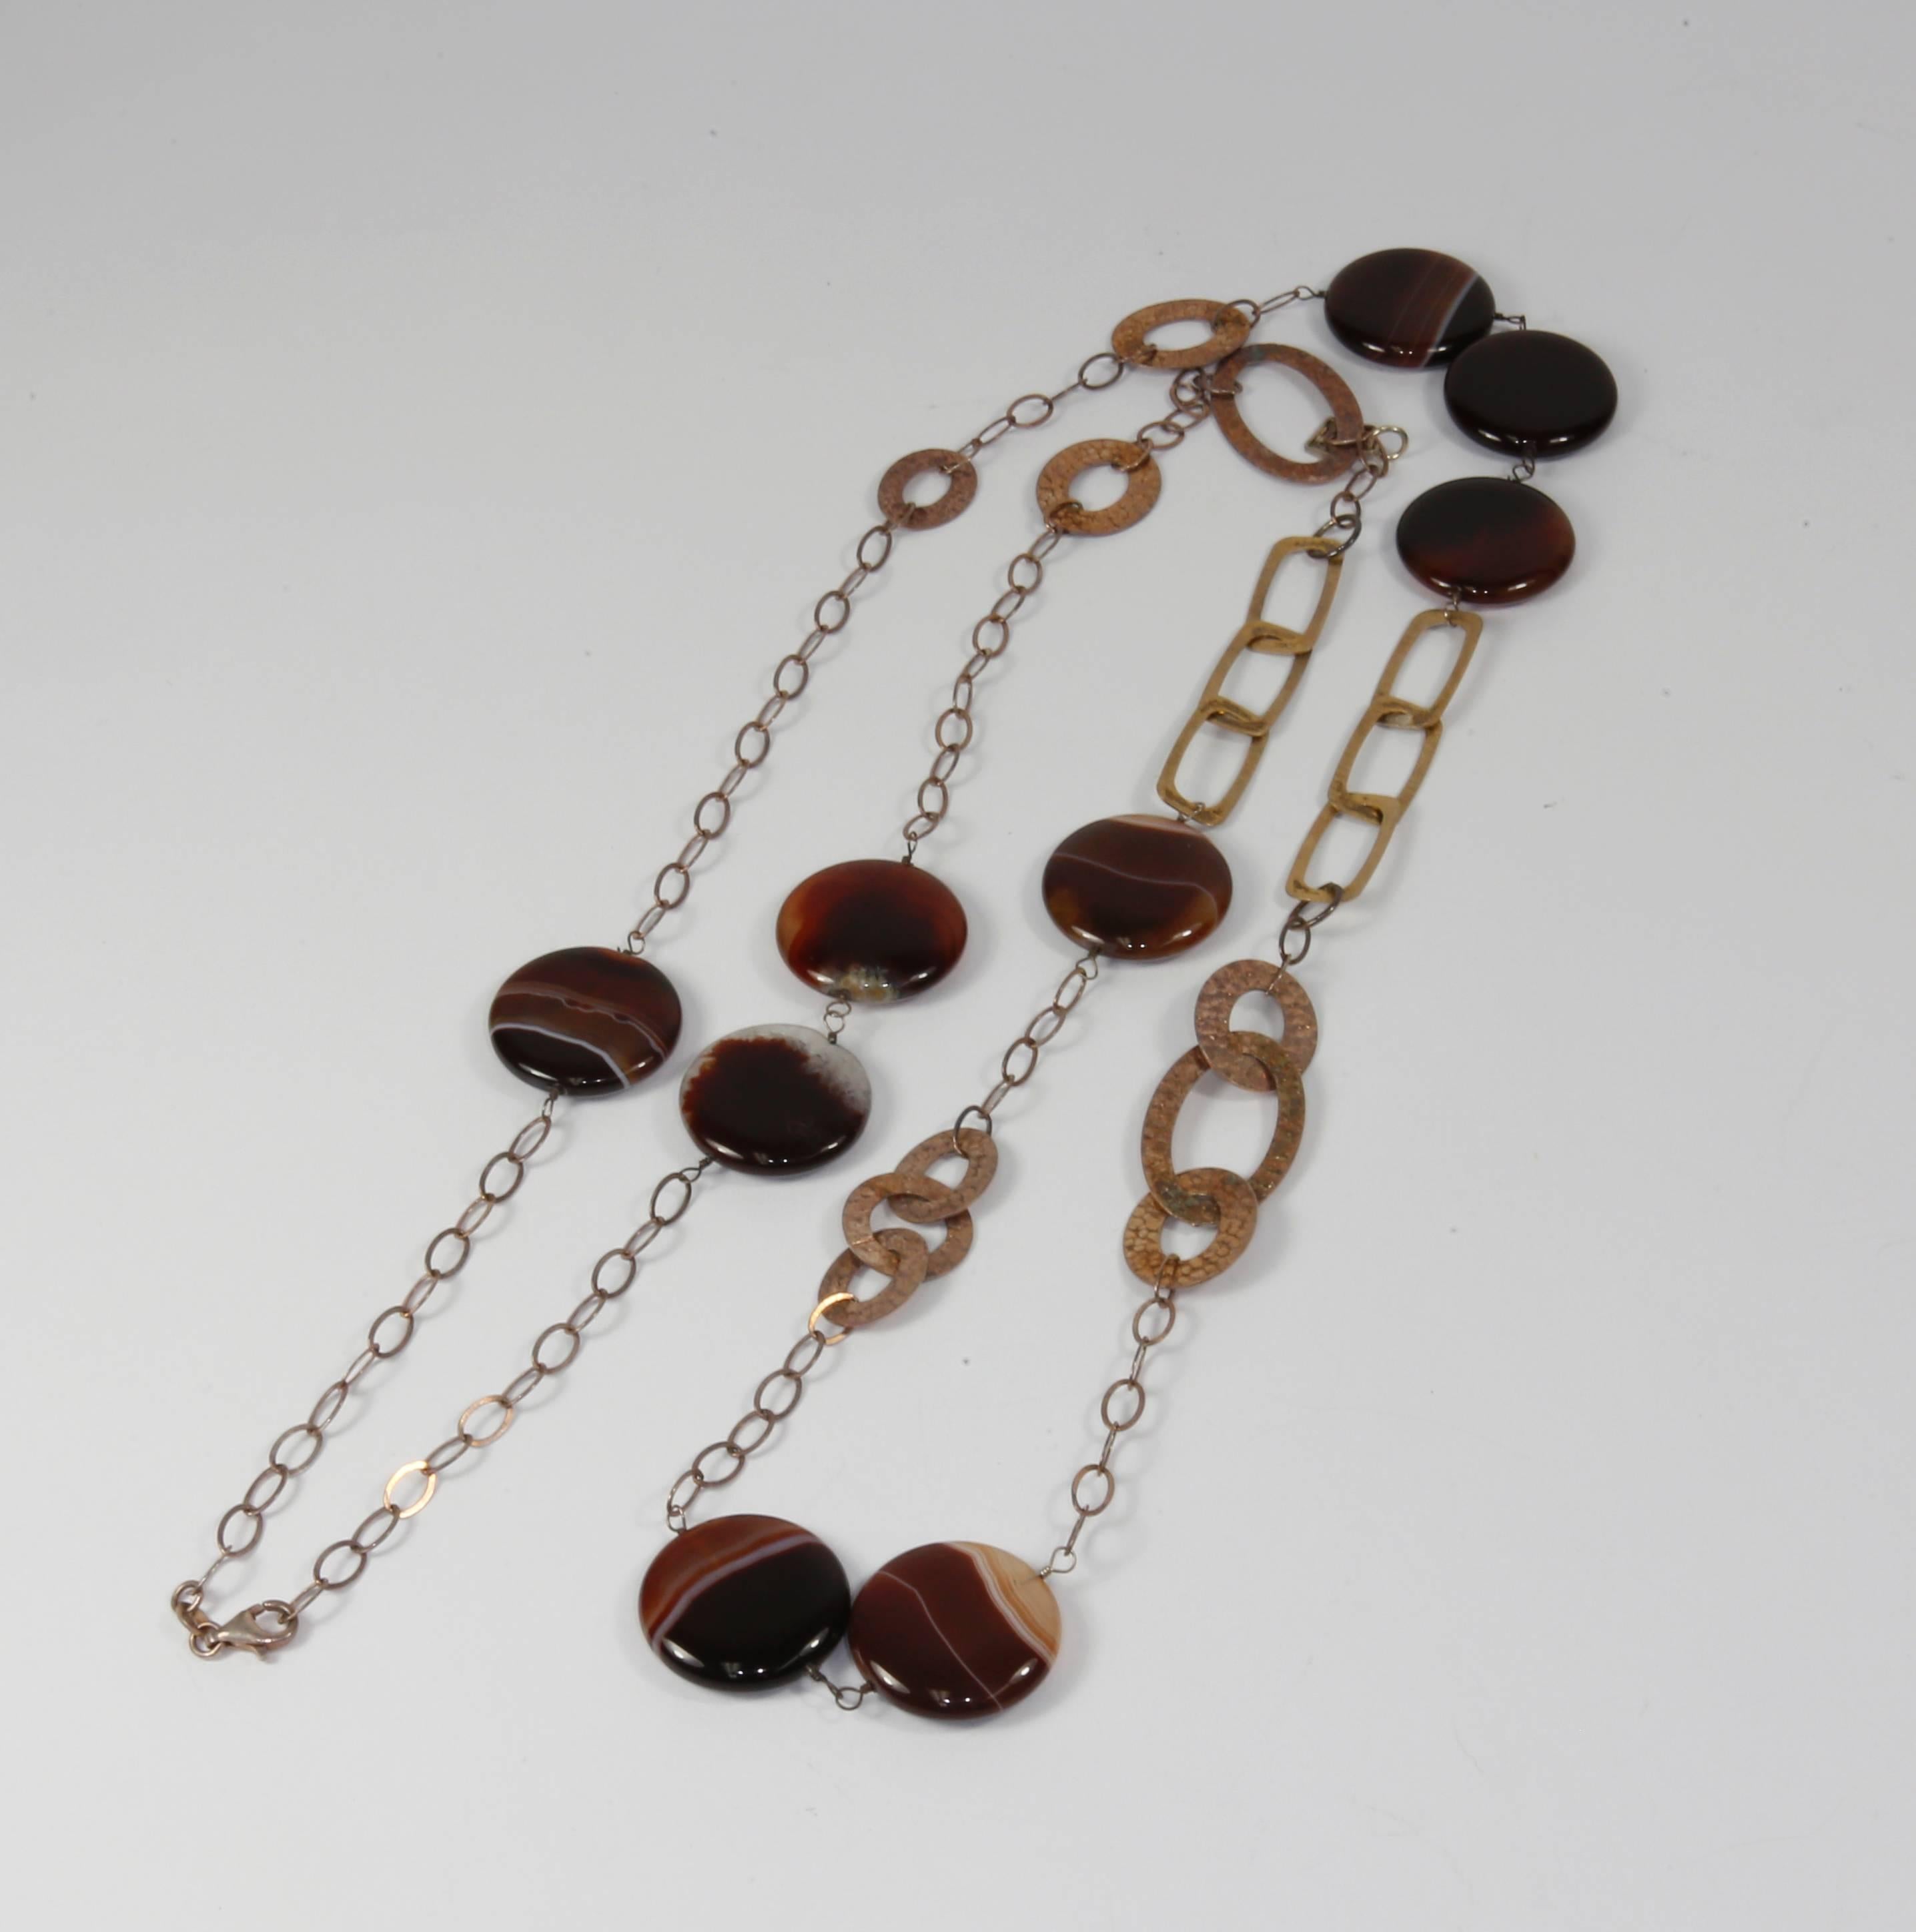 Fabulous Long and Bold sterling silver and banded agate chain necklace; comprising multi-shaped sections of sterling silver links,  alternating with large banded agate beads. The large banded agate beads are smoothly polished and display wonderful